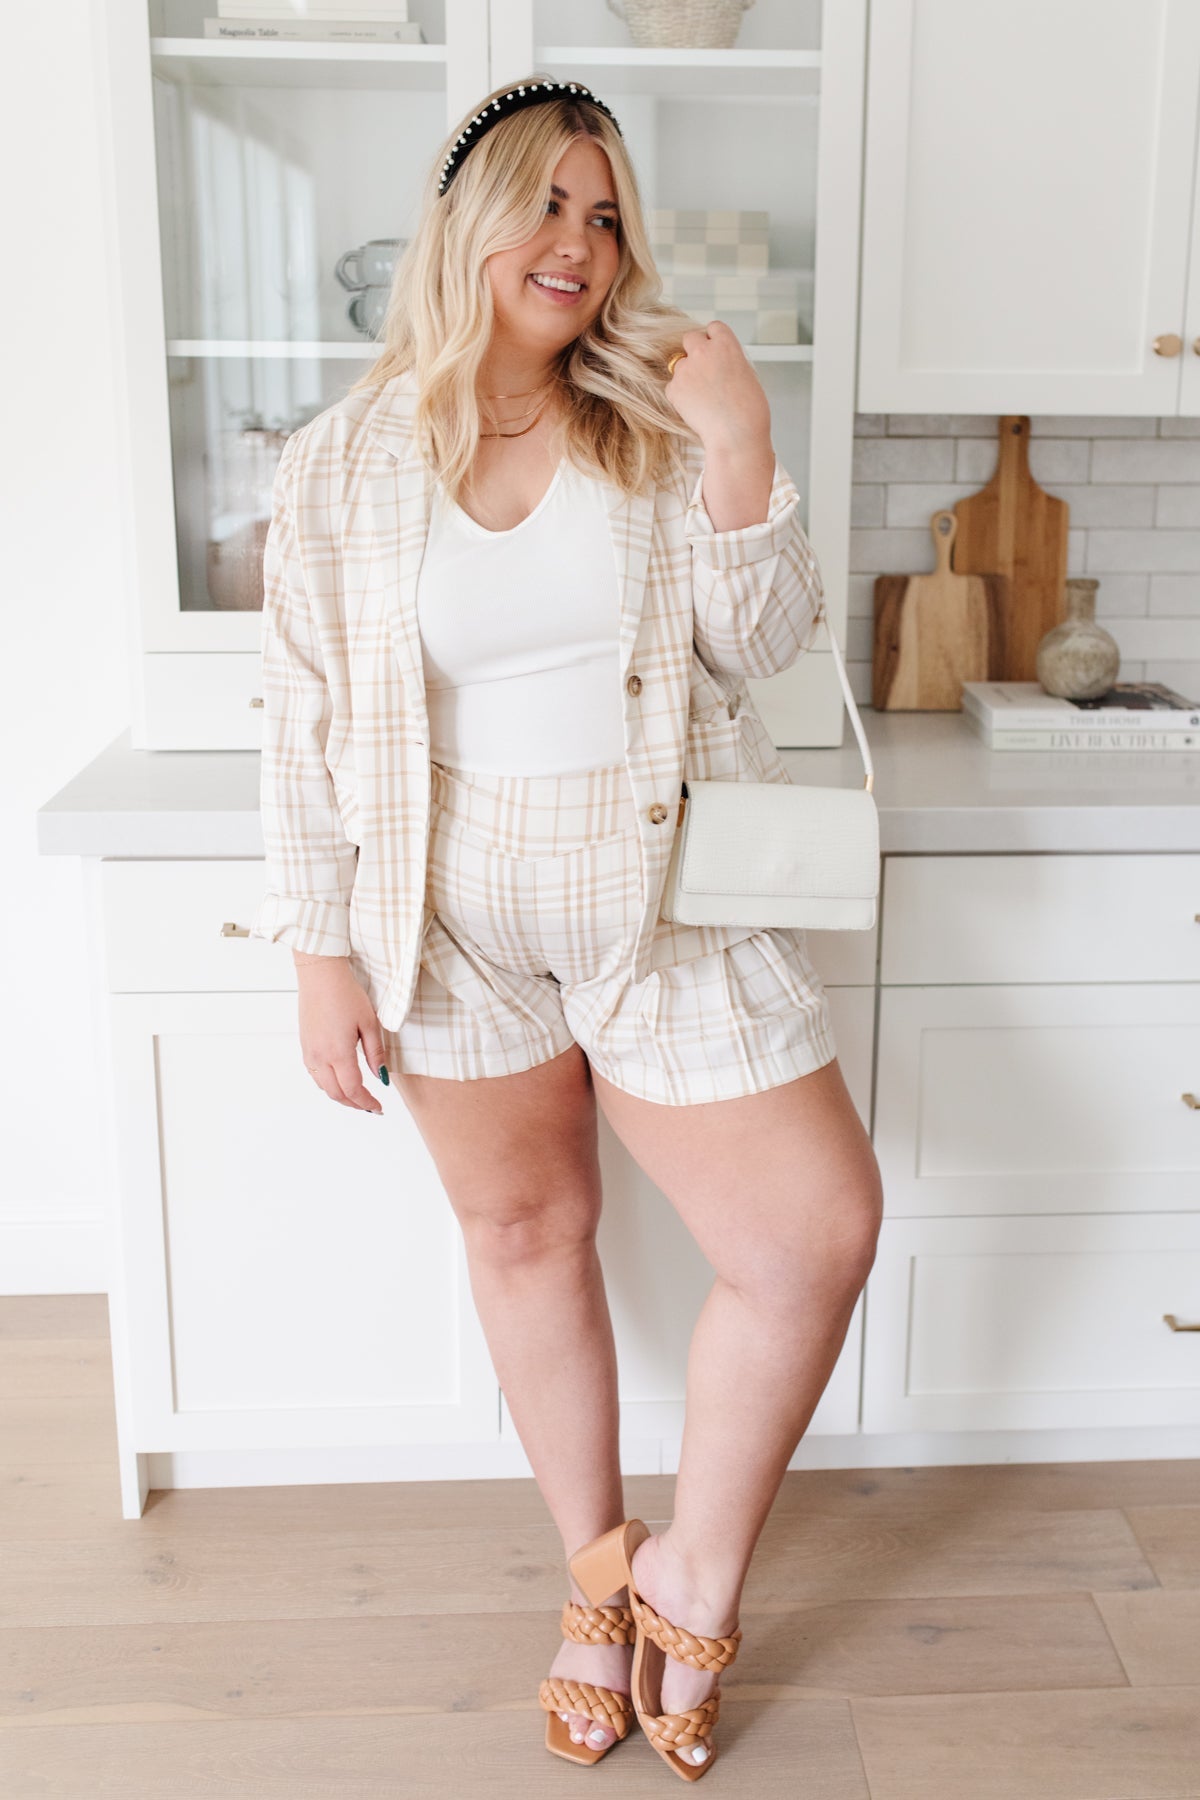 Dressed in Plaid Shorts (Online Exclusive)